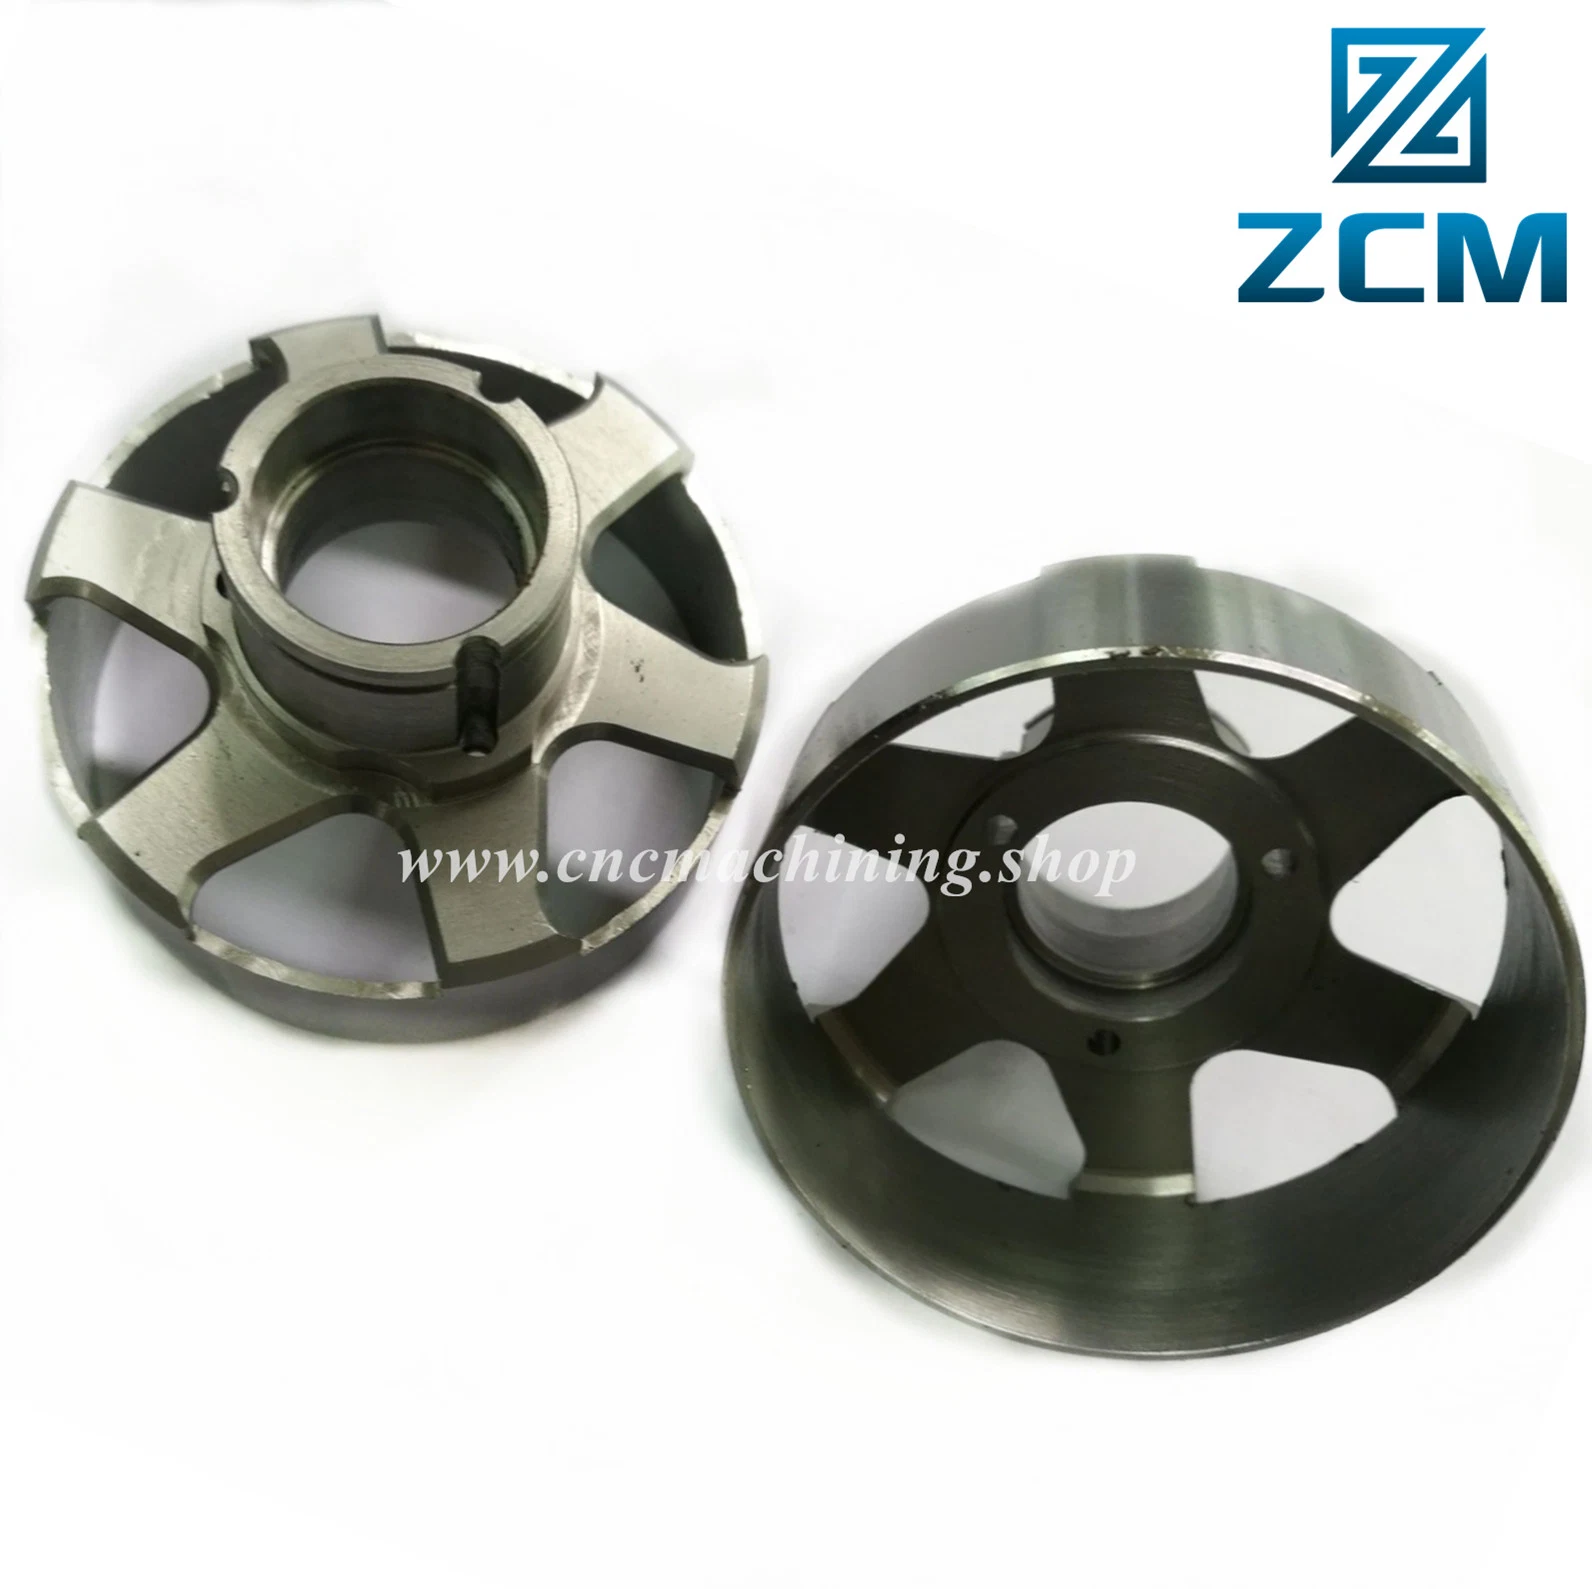 Shenzhen Custom Manufacturing CNC Machining Turning/Milling Machined Aluminum/Stainless Steel/Steel Alloy/Brass Tractors/Agricultural Machinery Parts